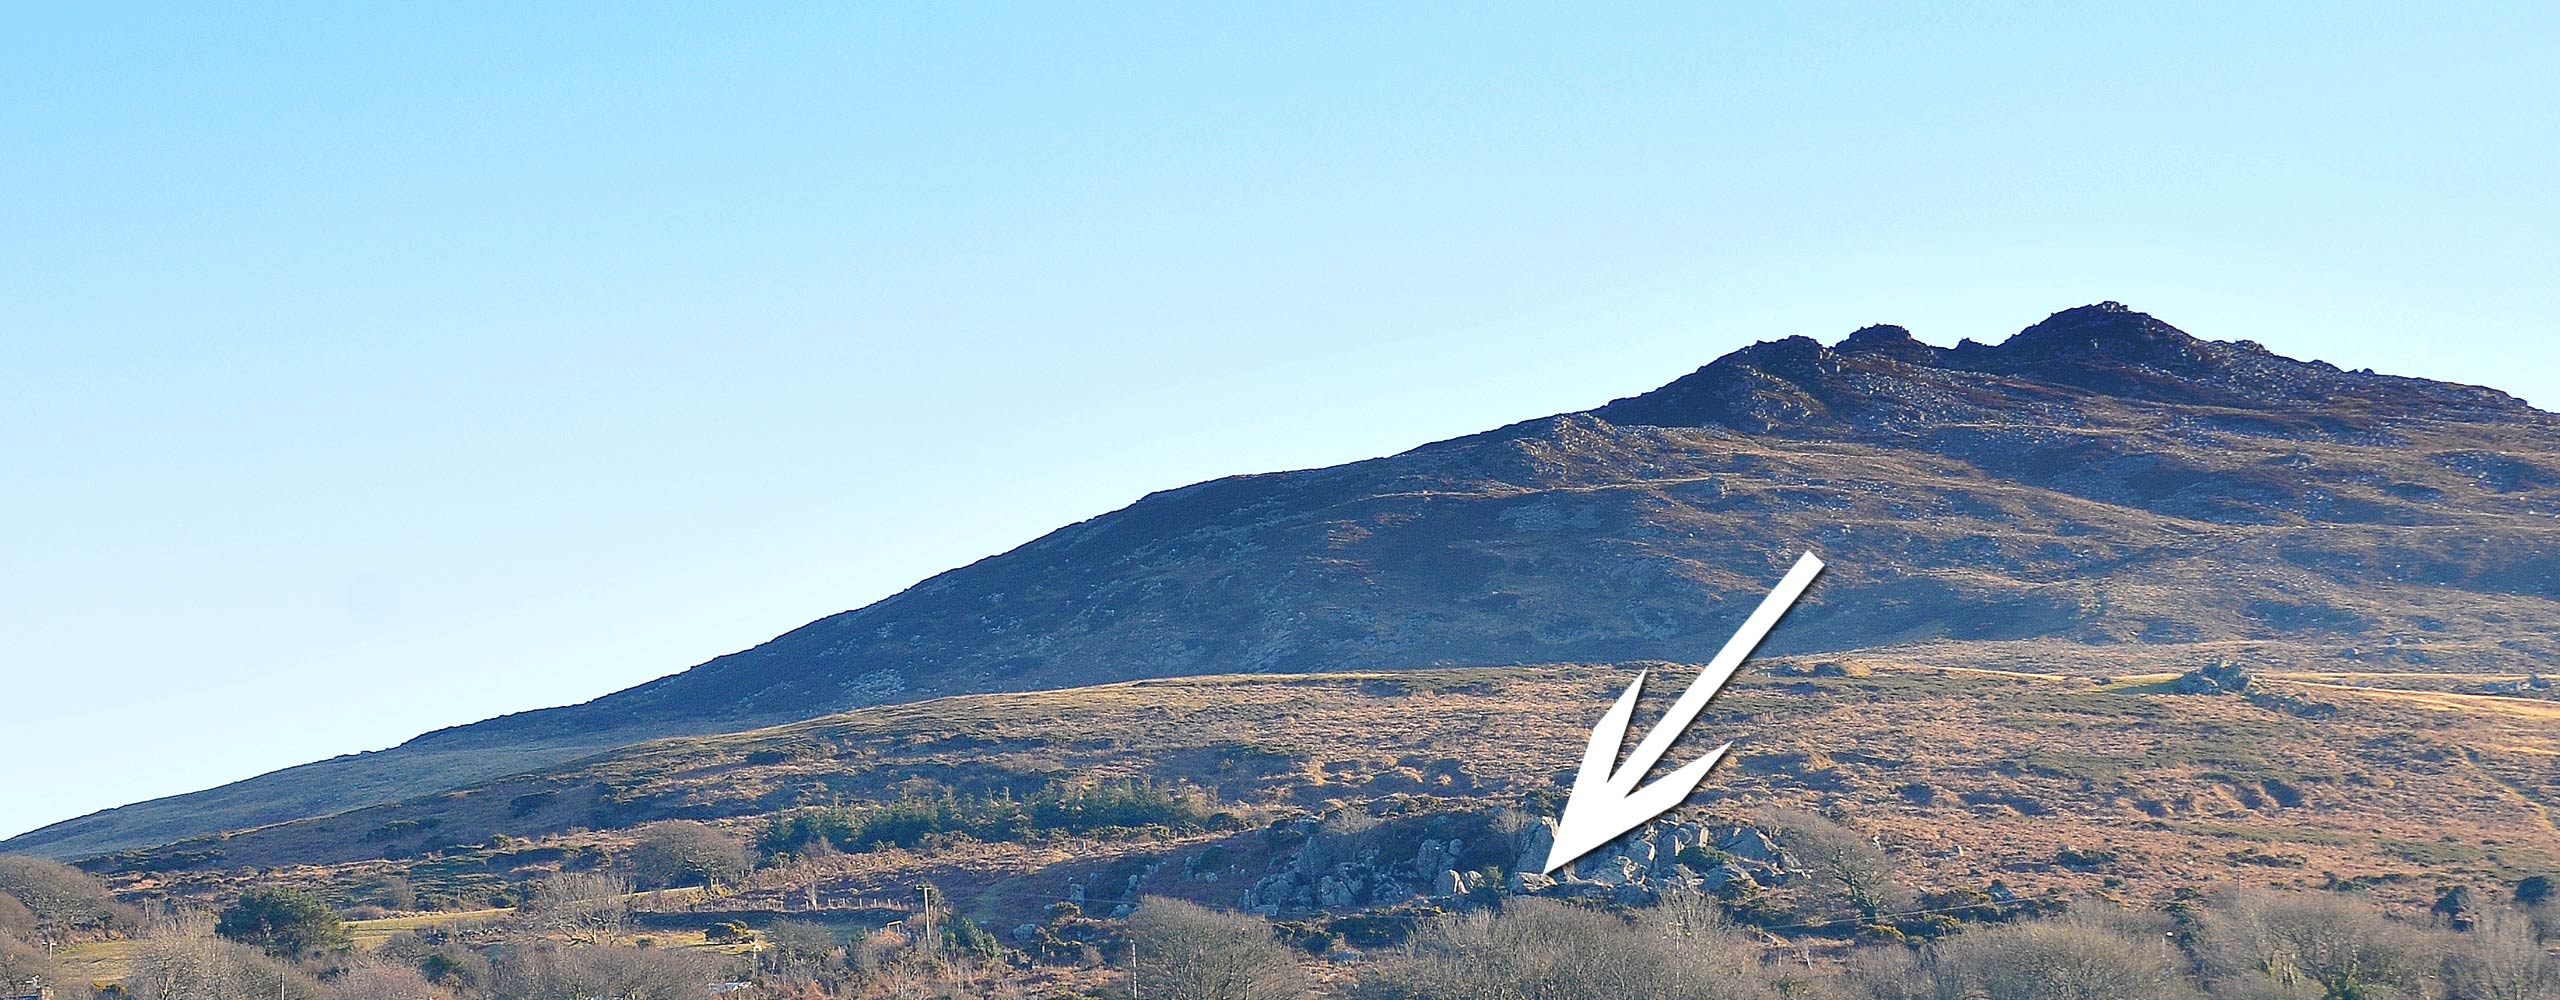 Image showing the location of the wishing well on Carningli Mountain